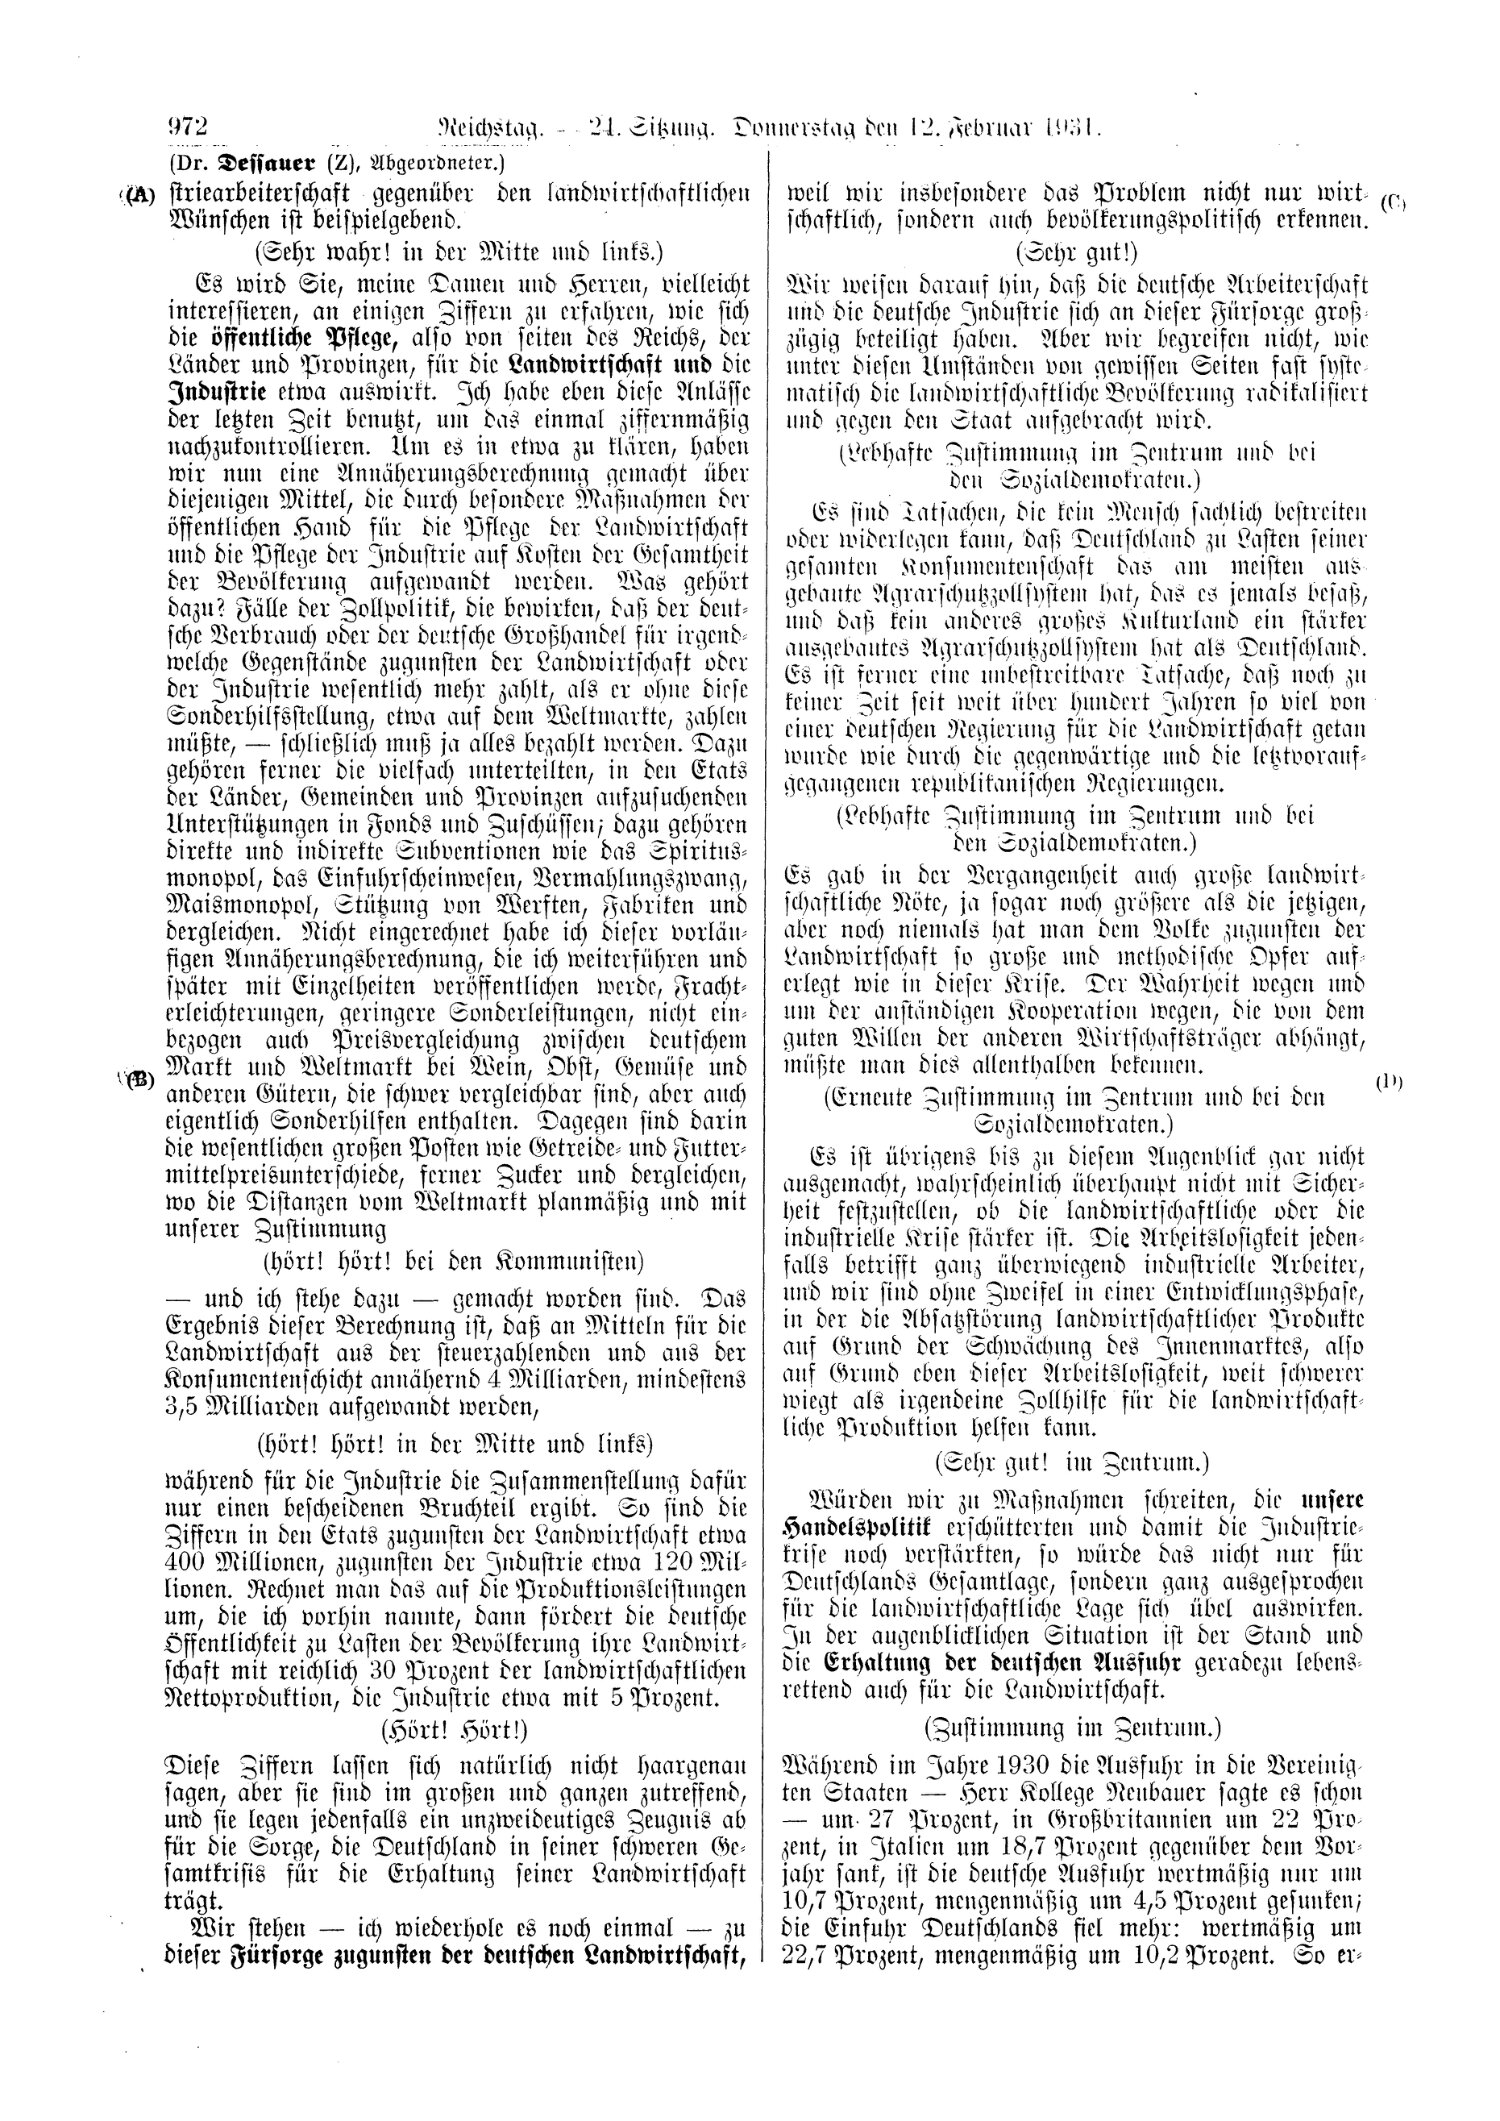 Scan of page 972